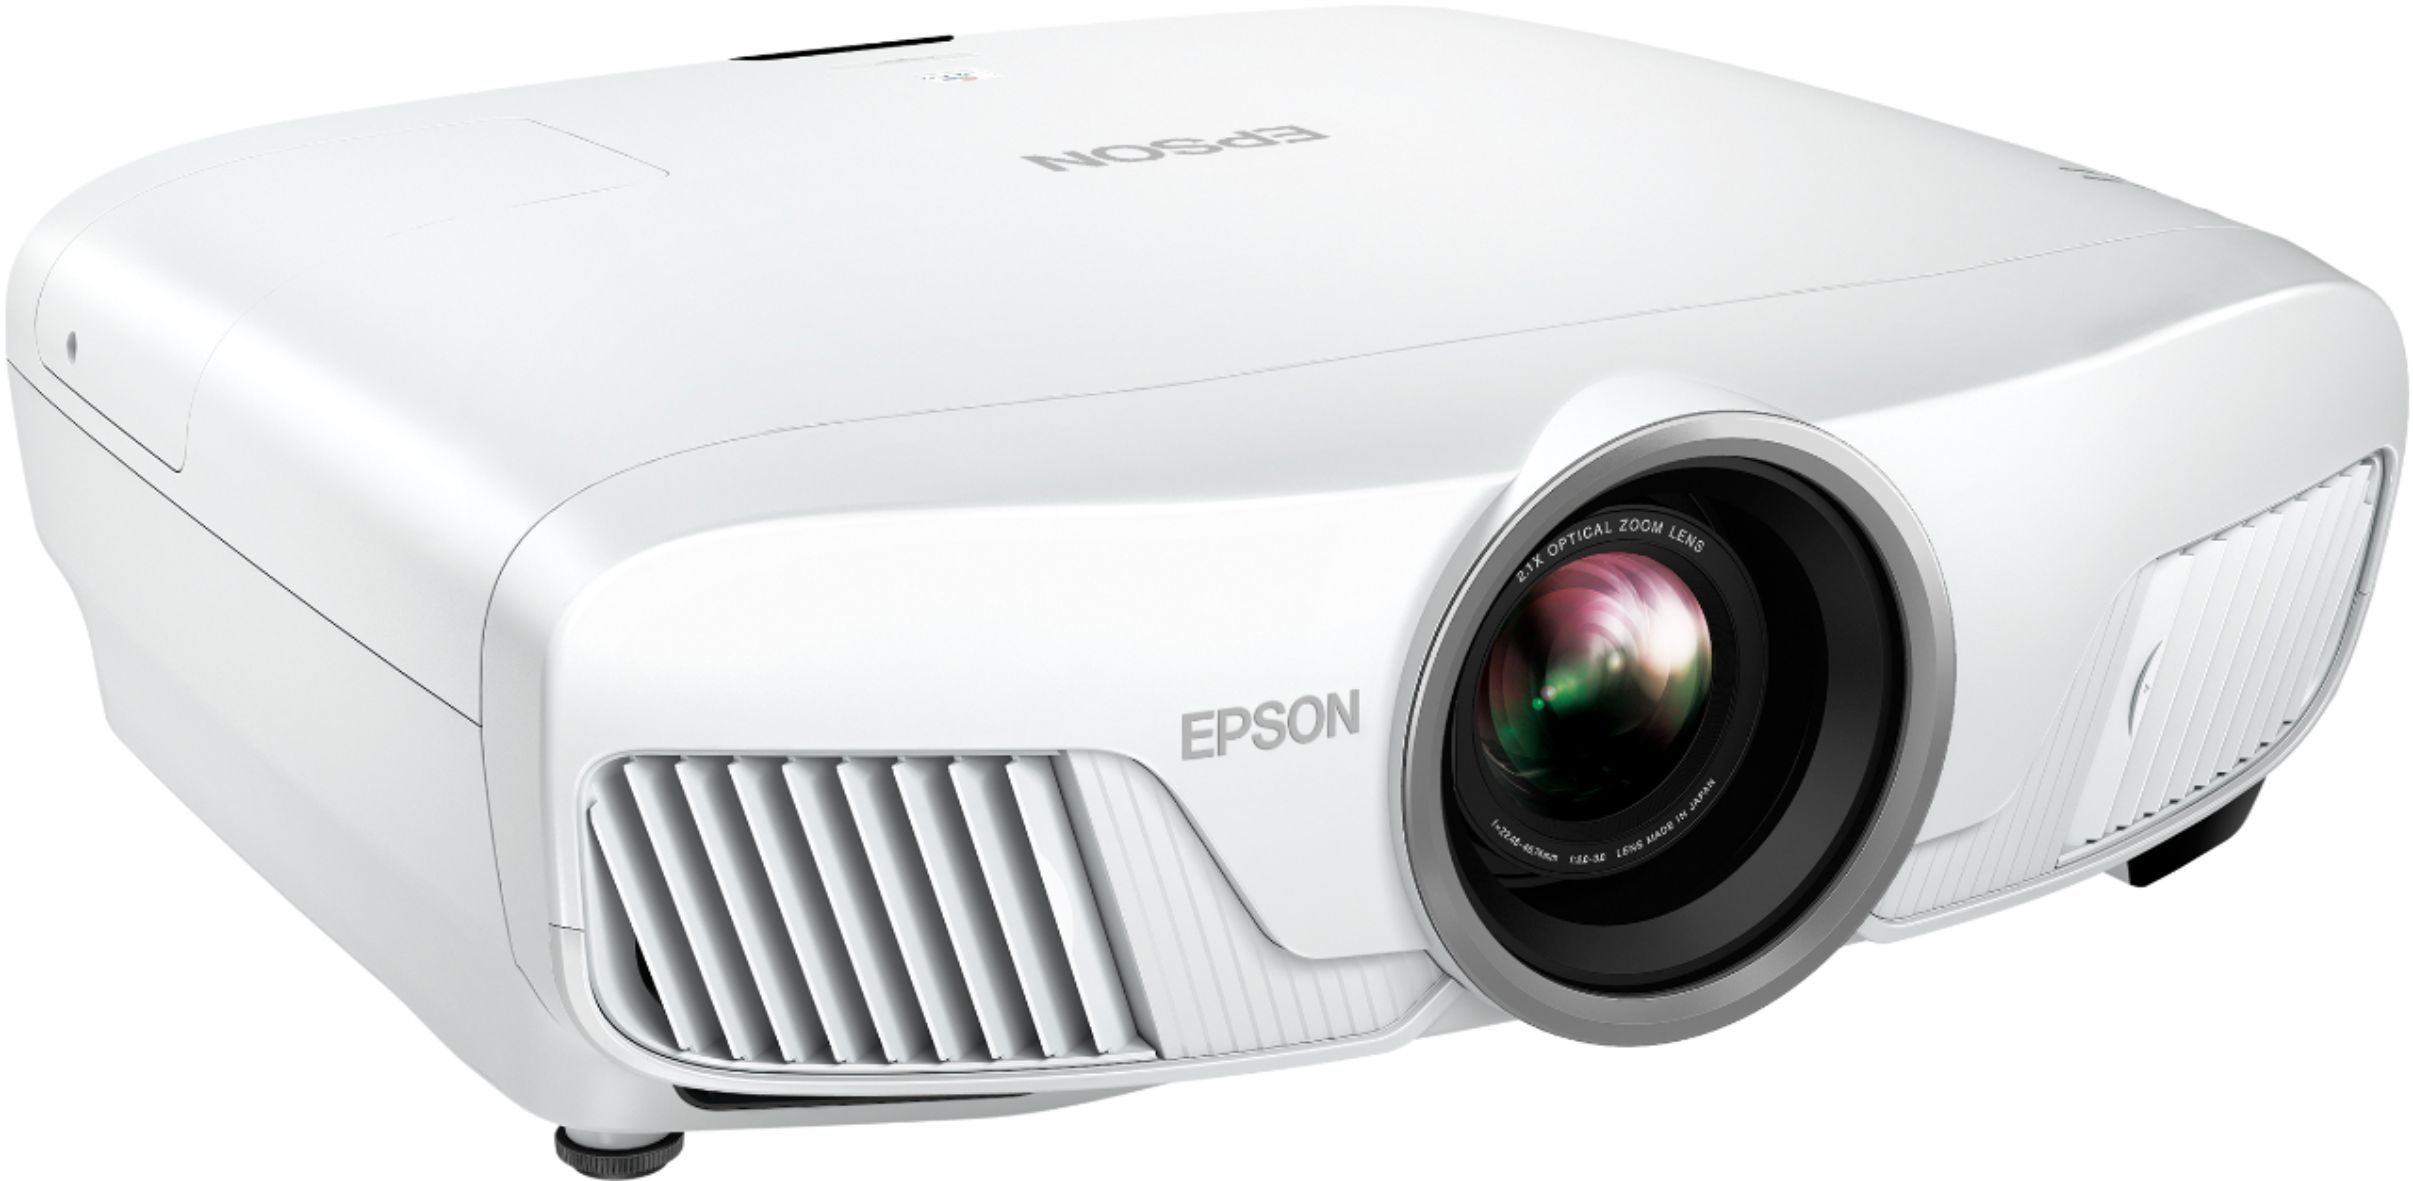 Angle View: Epson - Home Cinema 4010 4K 3LCD Projector with High Dynamic Range - White